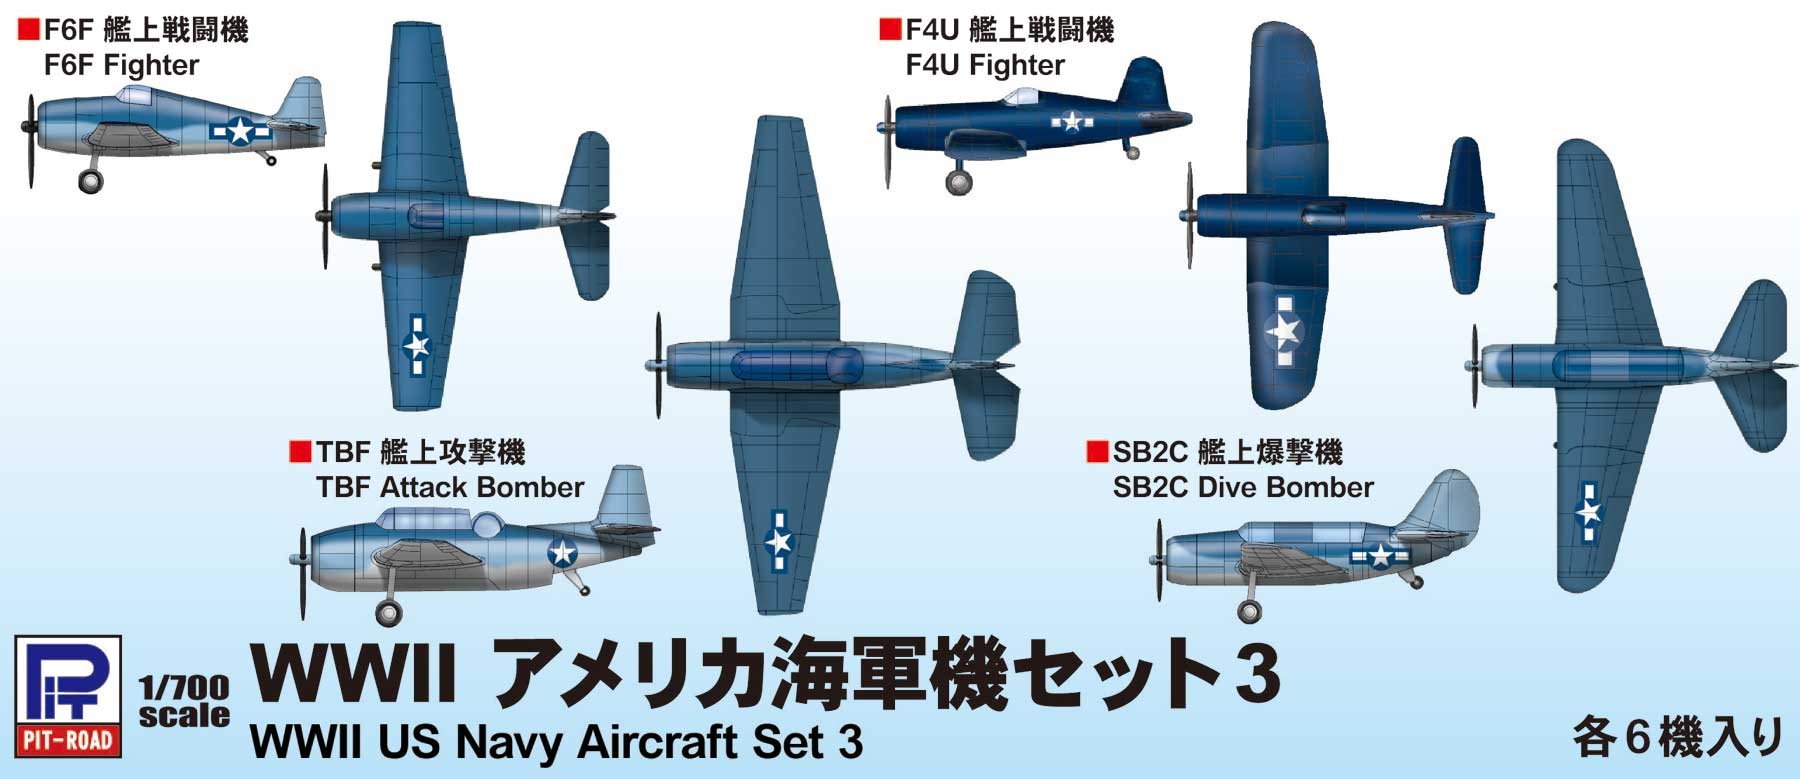 wwii naval aircraft